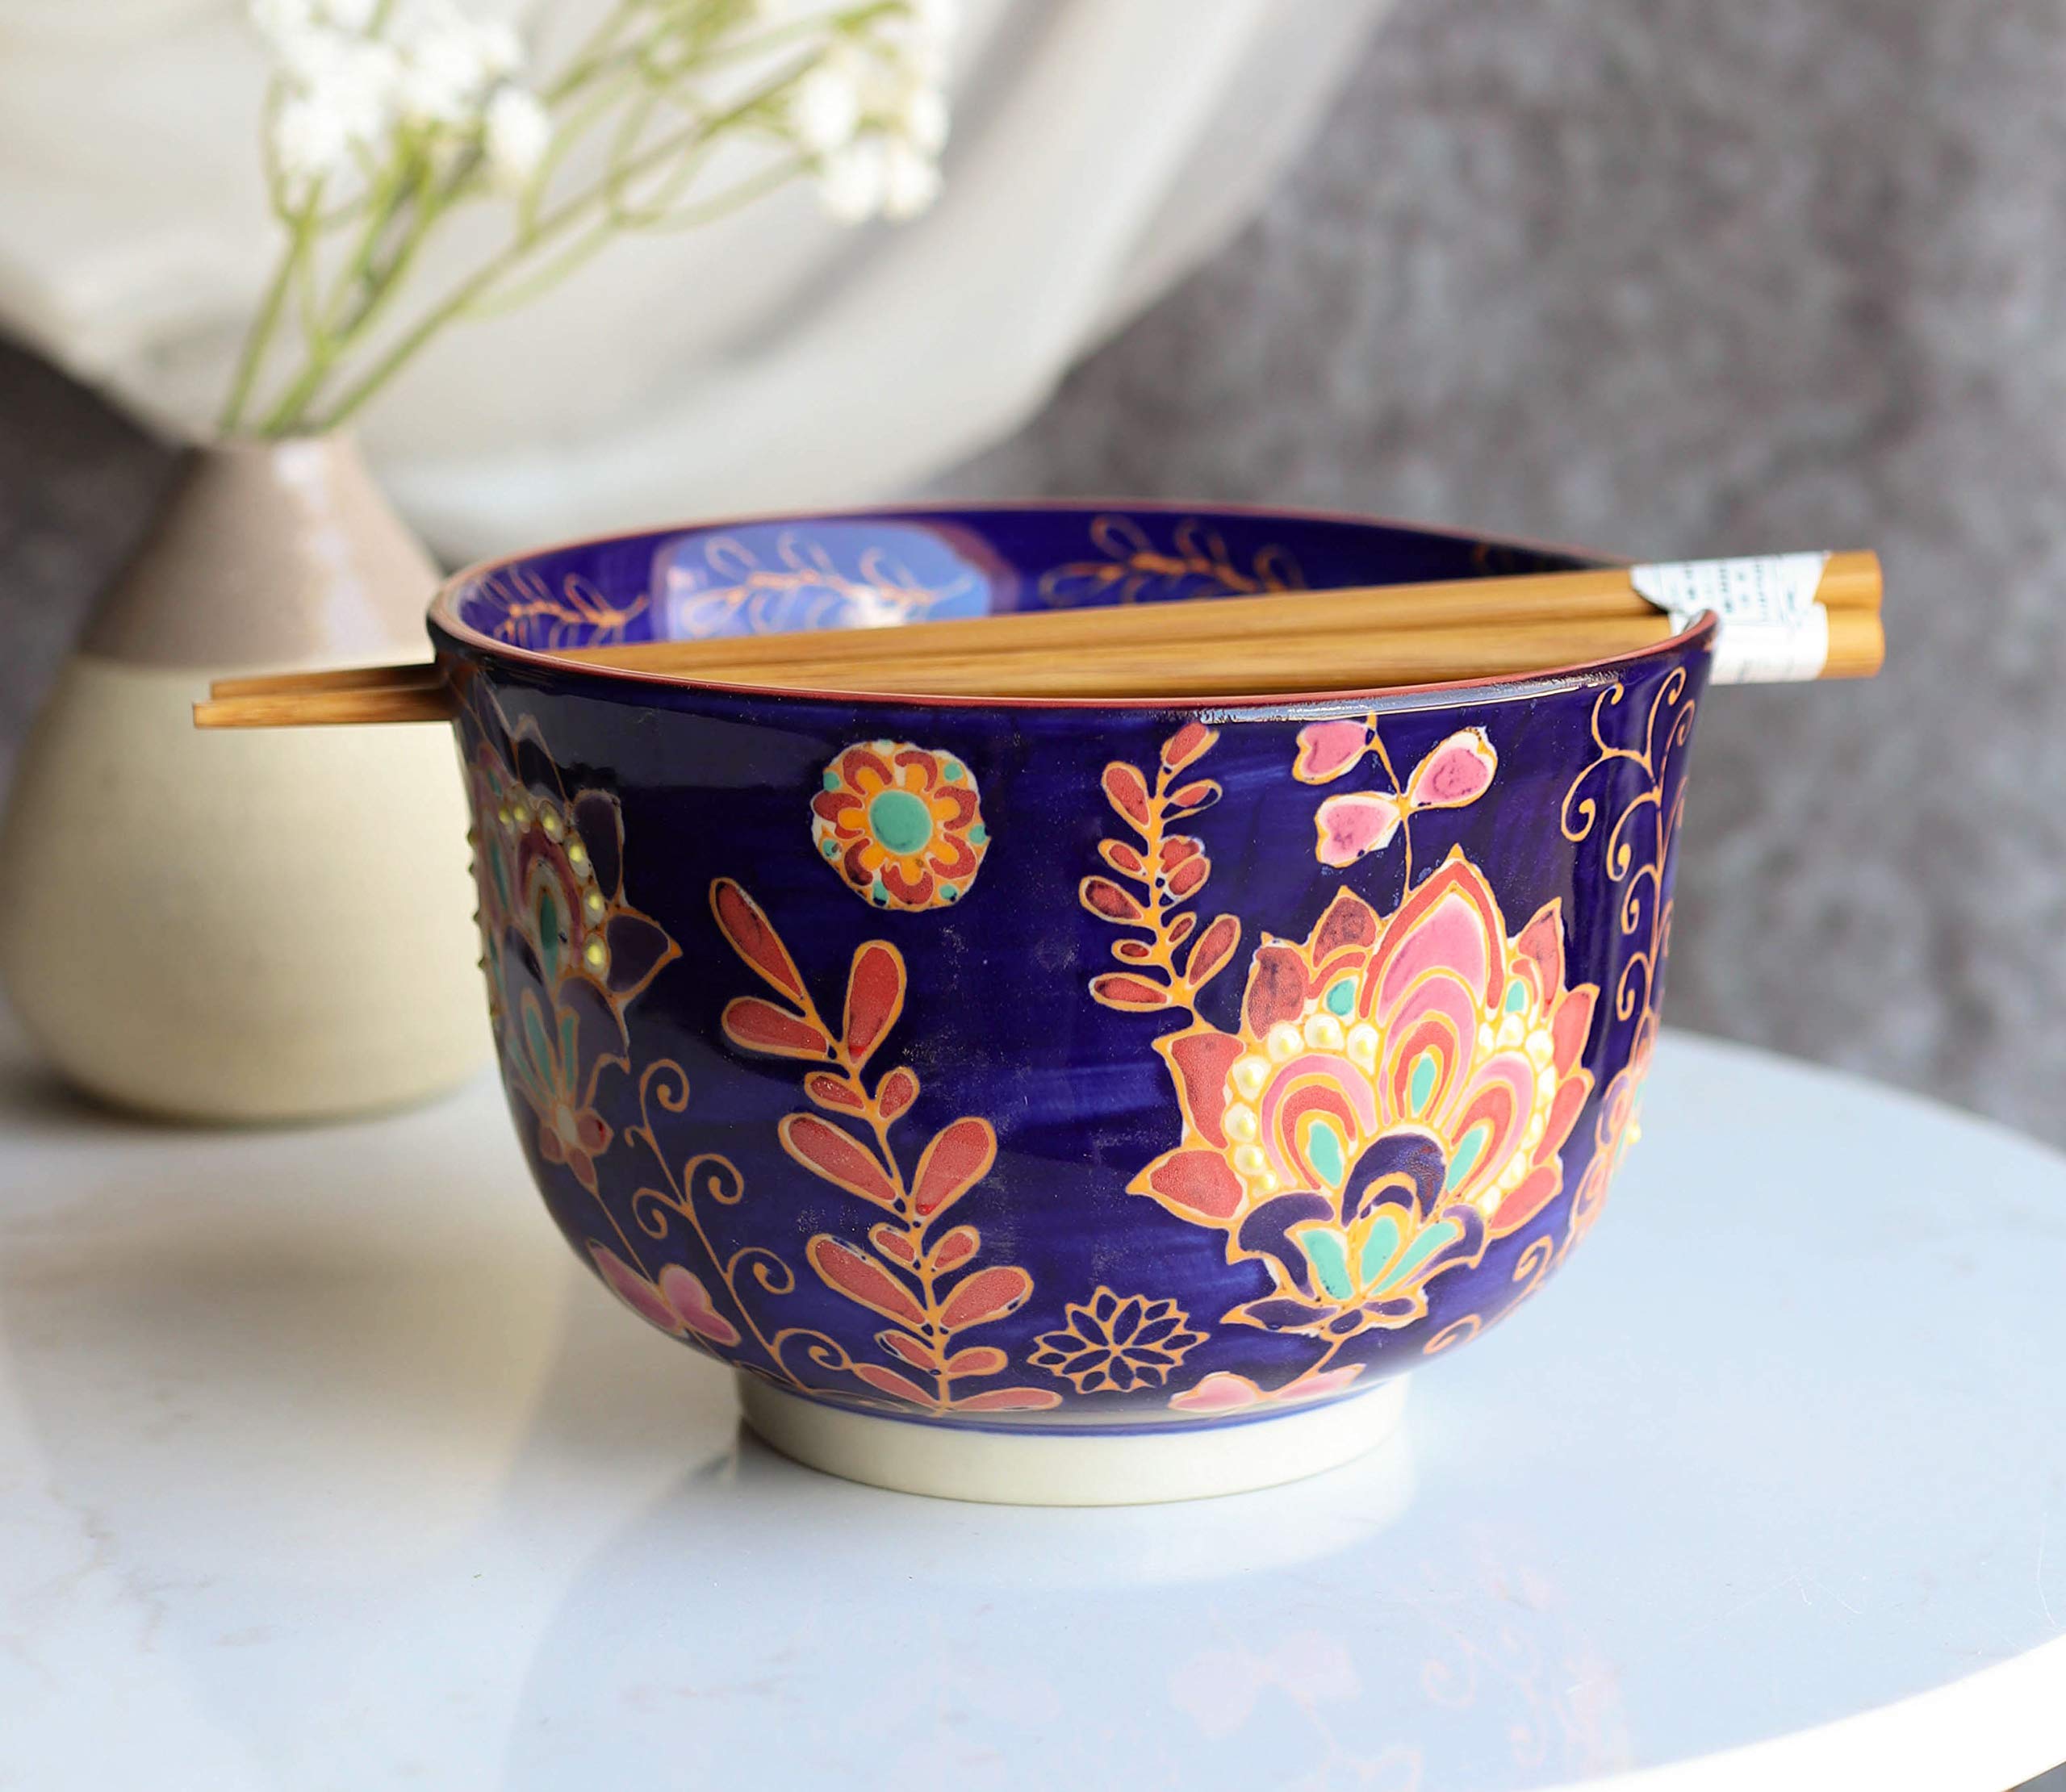 Ebros Midnight Purple Mandala Purple Floral Blossoms Ramen Udon Noodles Large 6.25"D Soup Bowl With Bamboo Chopsticks And Built In Rest Set for Asian Dining Rice Meal Bowls Decor Kitchen